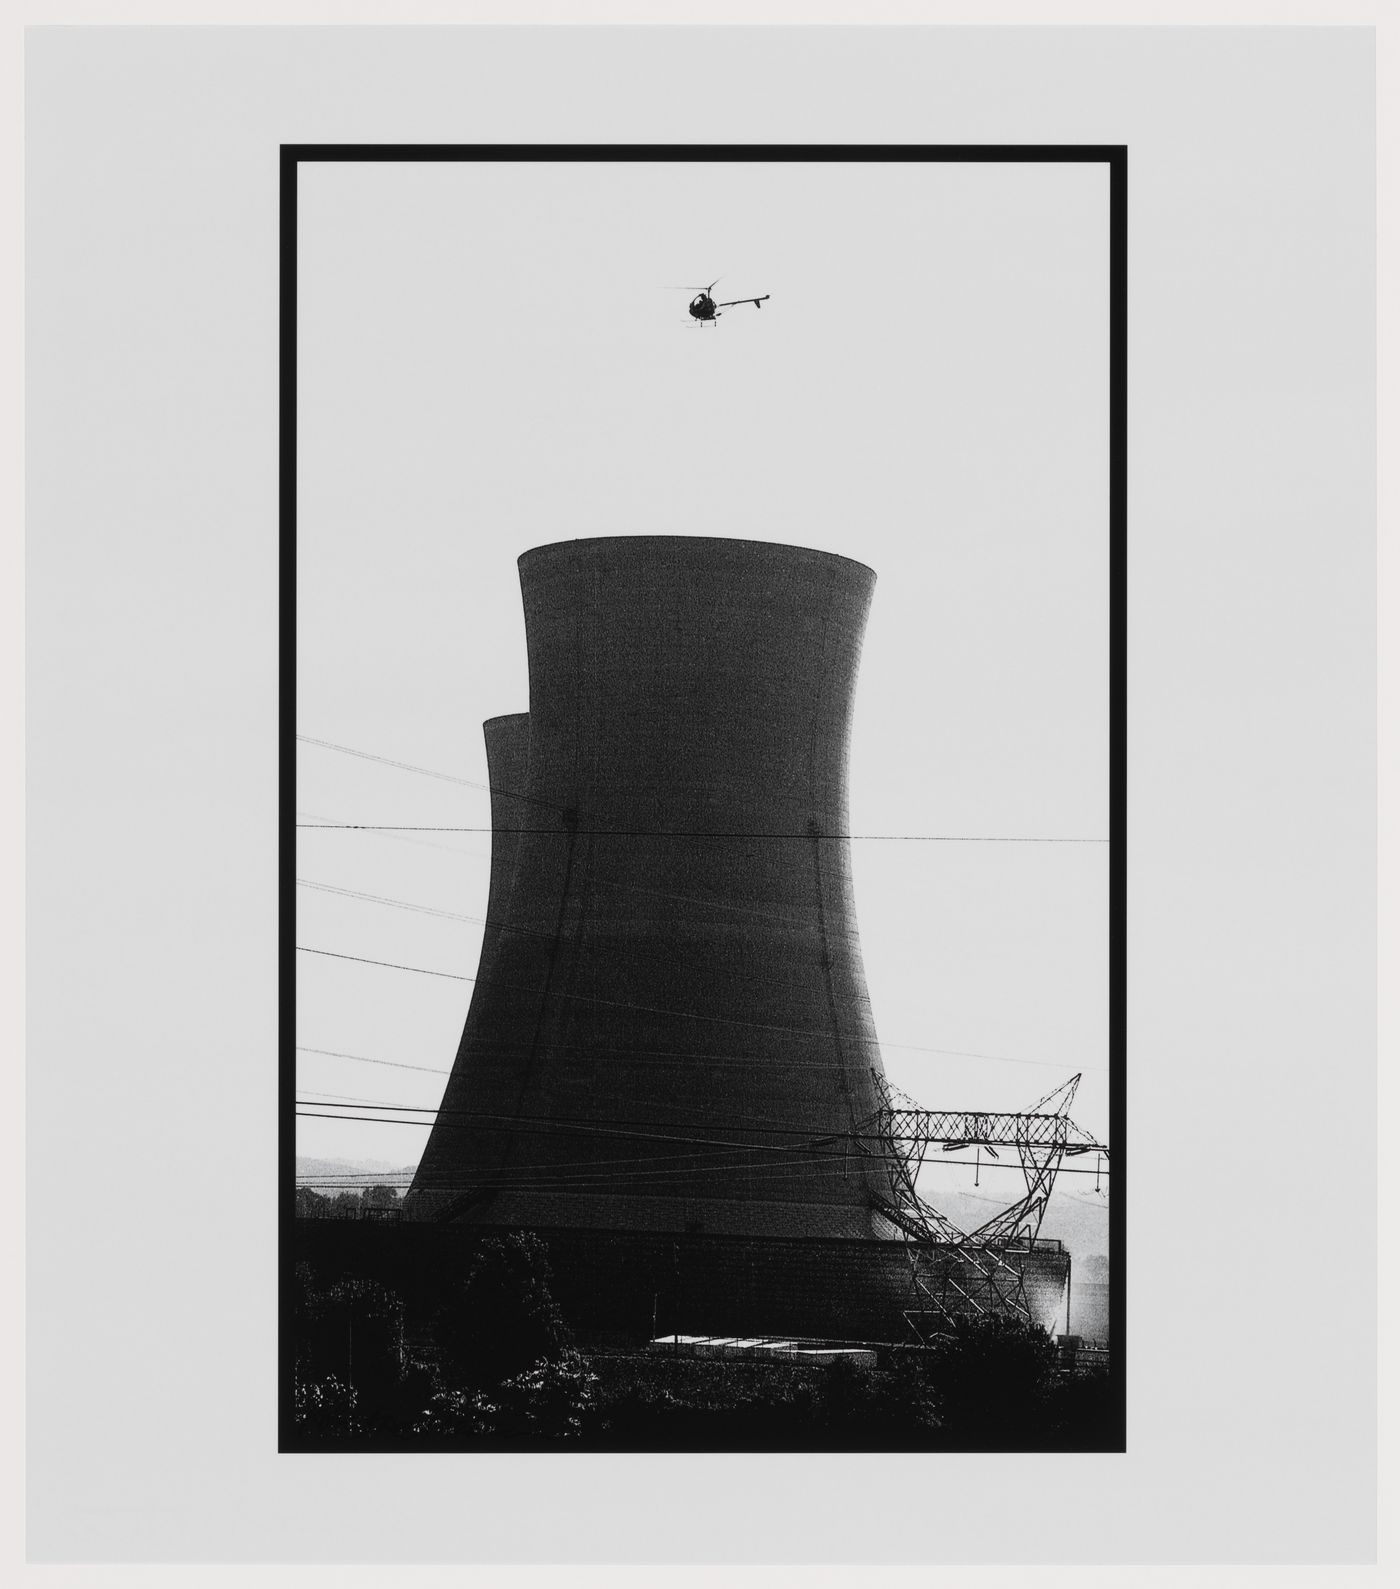 Radiation Tracking Chopper over Unit II Towers, Three Mile Island Nuclear Generating Station, Londonderry Township, Middletown, Pennsylvania